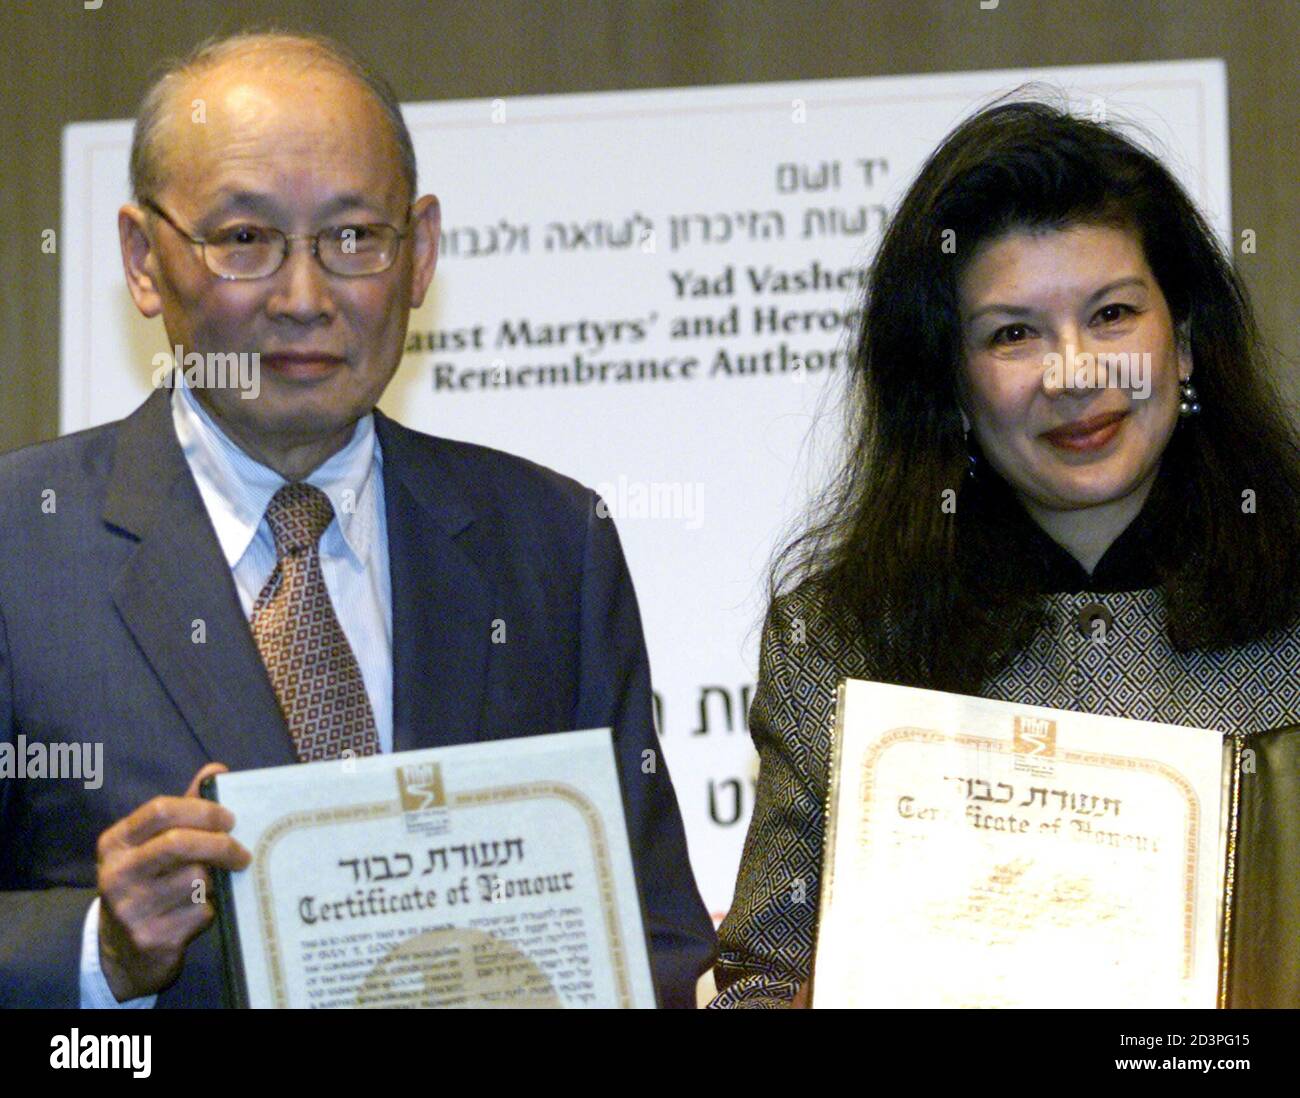 The late Chinese Consul-General in Vienna during 1938-40, Ho Feng Shan's, son Monto and daughter Manli display their 'Righteous Among The Nations' awards in the Yad Vashem Holocaust Memorial auditorium in Jerusalem January 23, 2001. Monto, from Pittsburgh, PA and Taiwan, and Manli, from Maine and San Francisco, received the award on behalf of their father who issued hundreds, if not thousands, of exit visas to Jews living in Austria which was part of Nazi Germany. Shan disregarded orders from his superiors and continuing issuing visas to Shanghai to all Jews who requested them, thus saving man Stock Photo